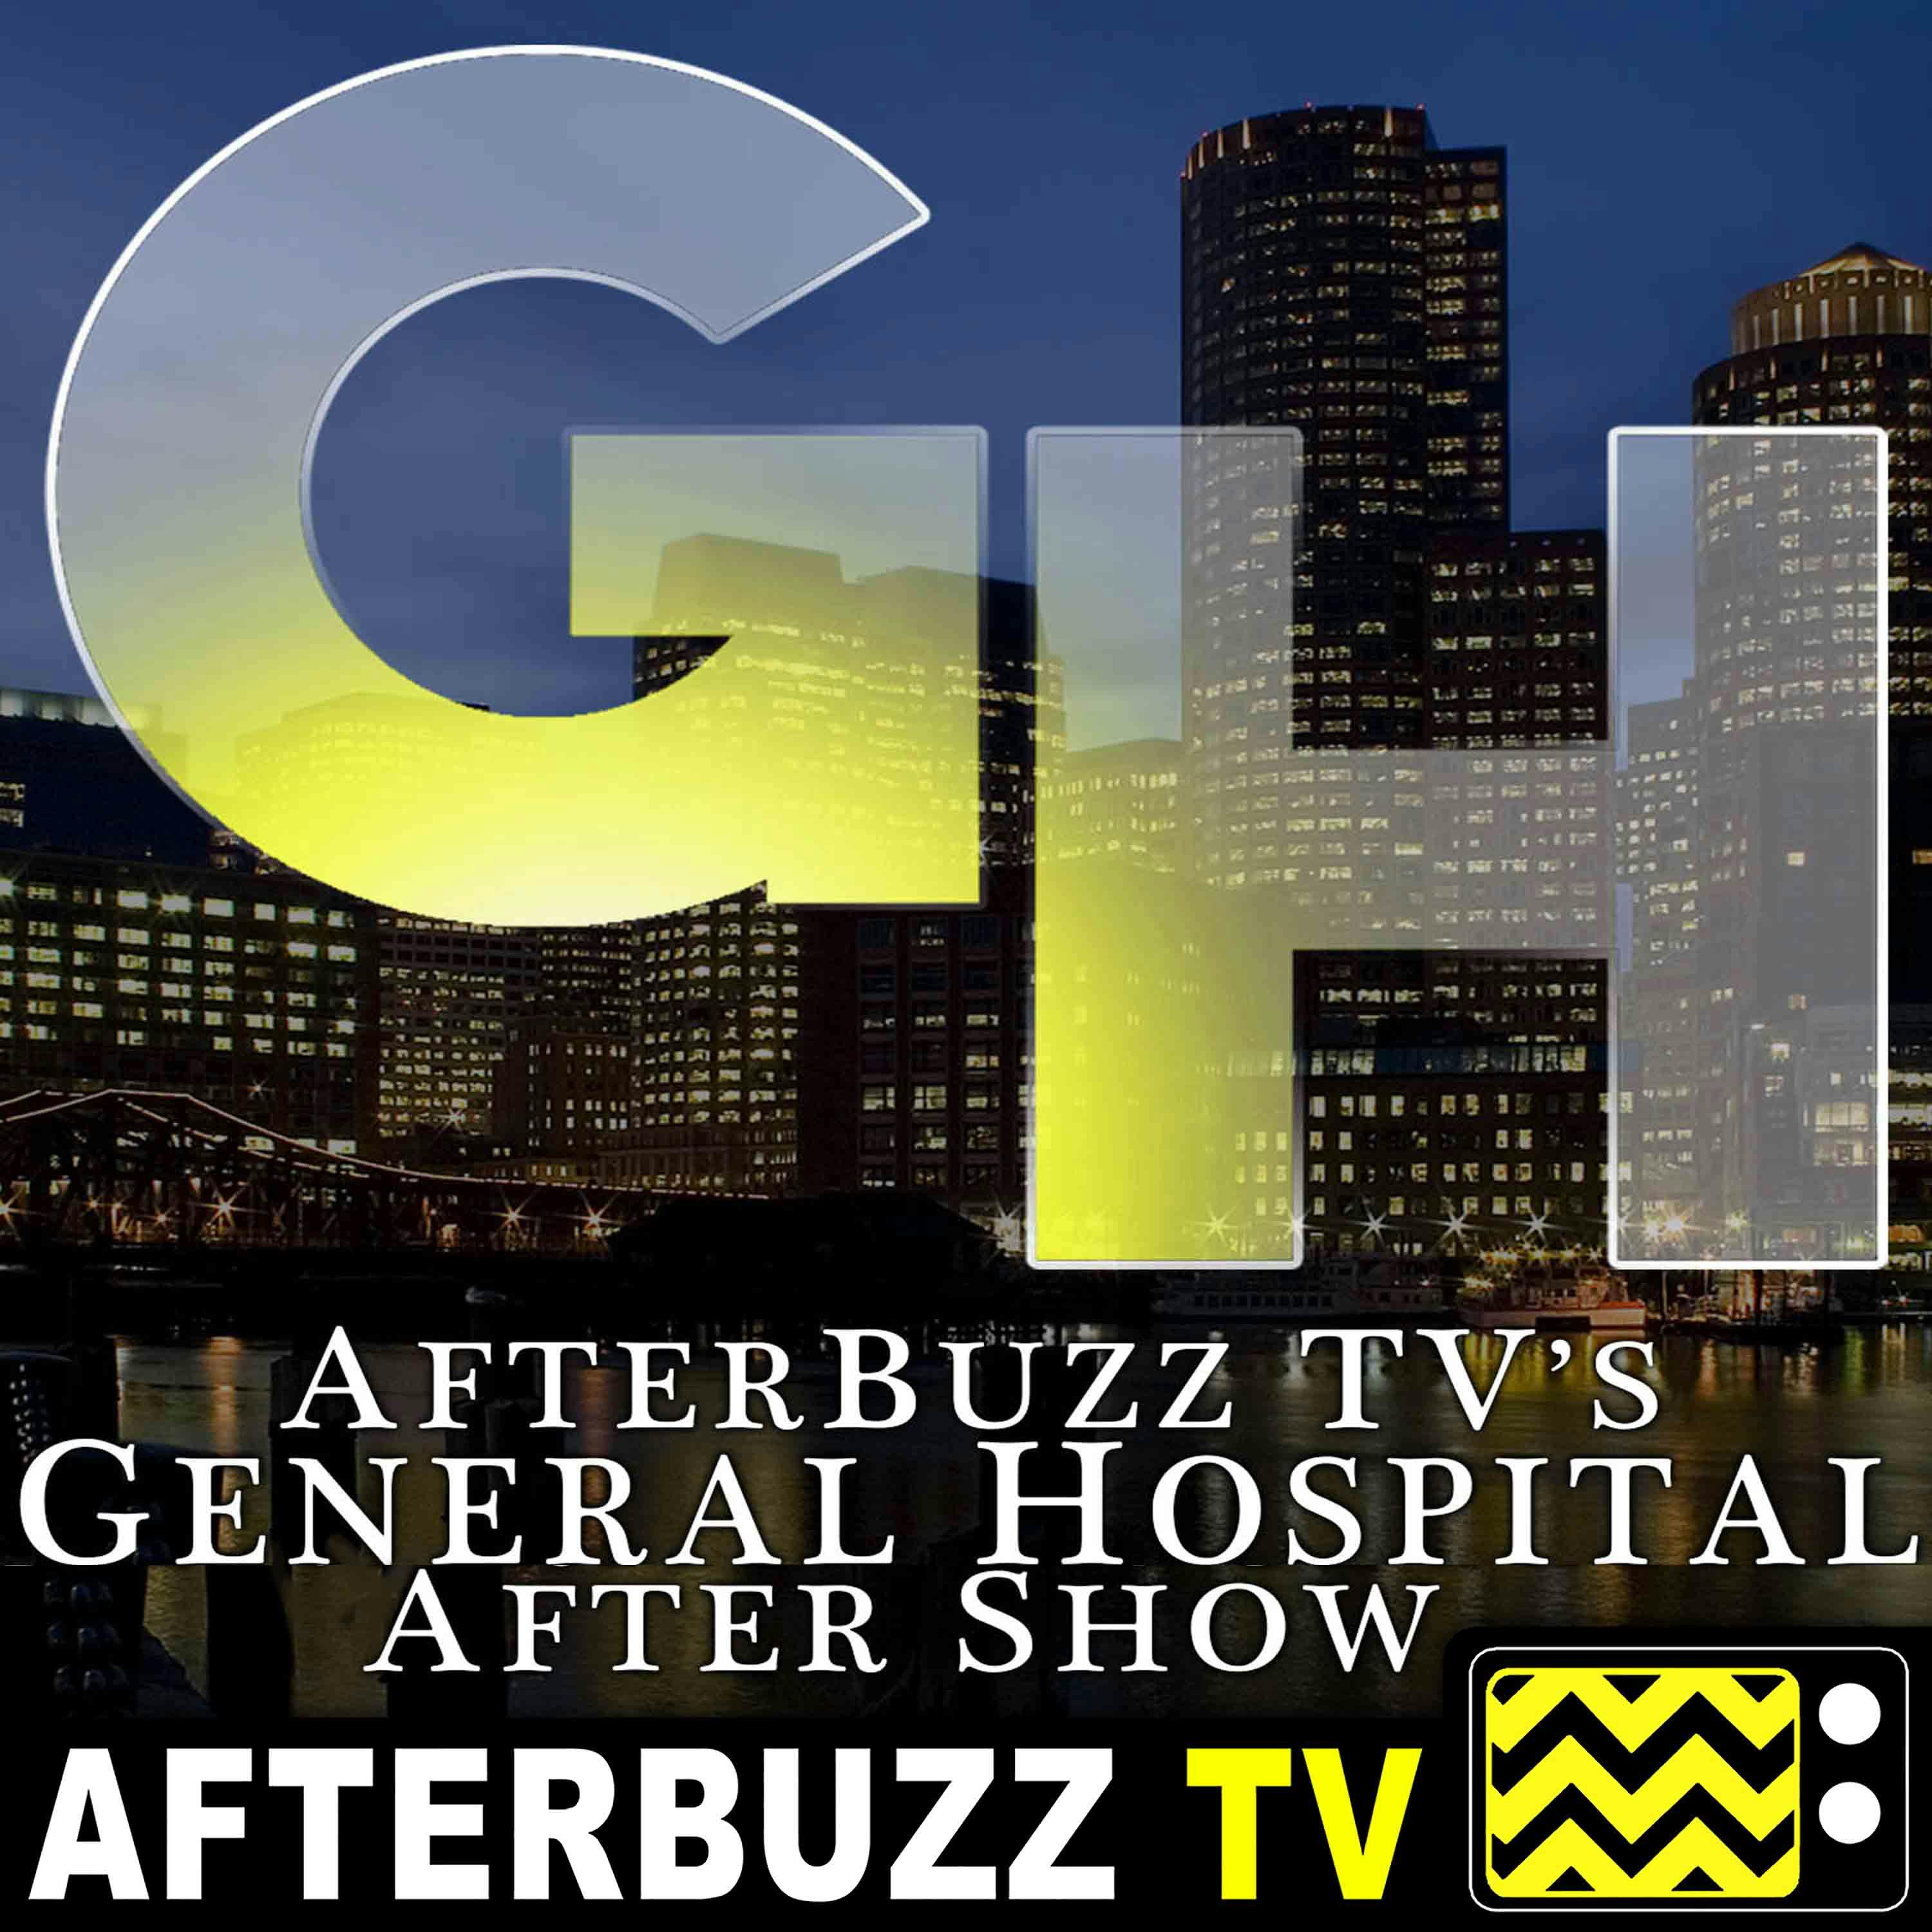 Review Of General Hospital for October 8th - October 12th, 2018